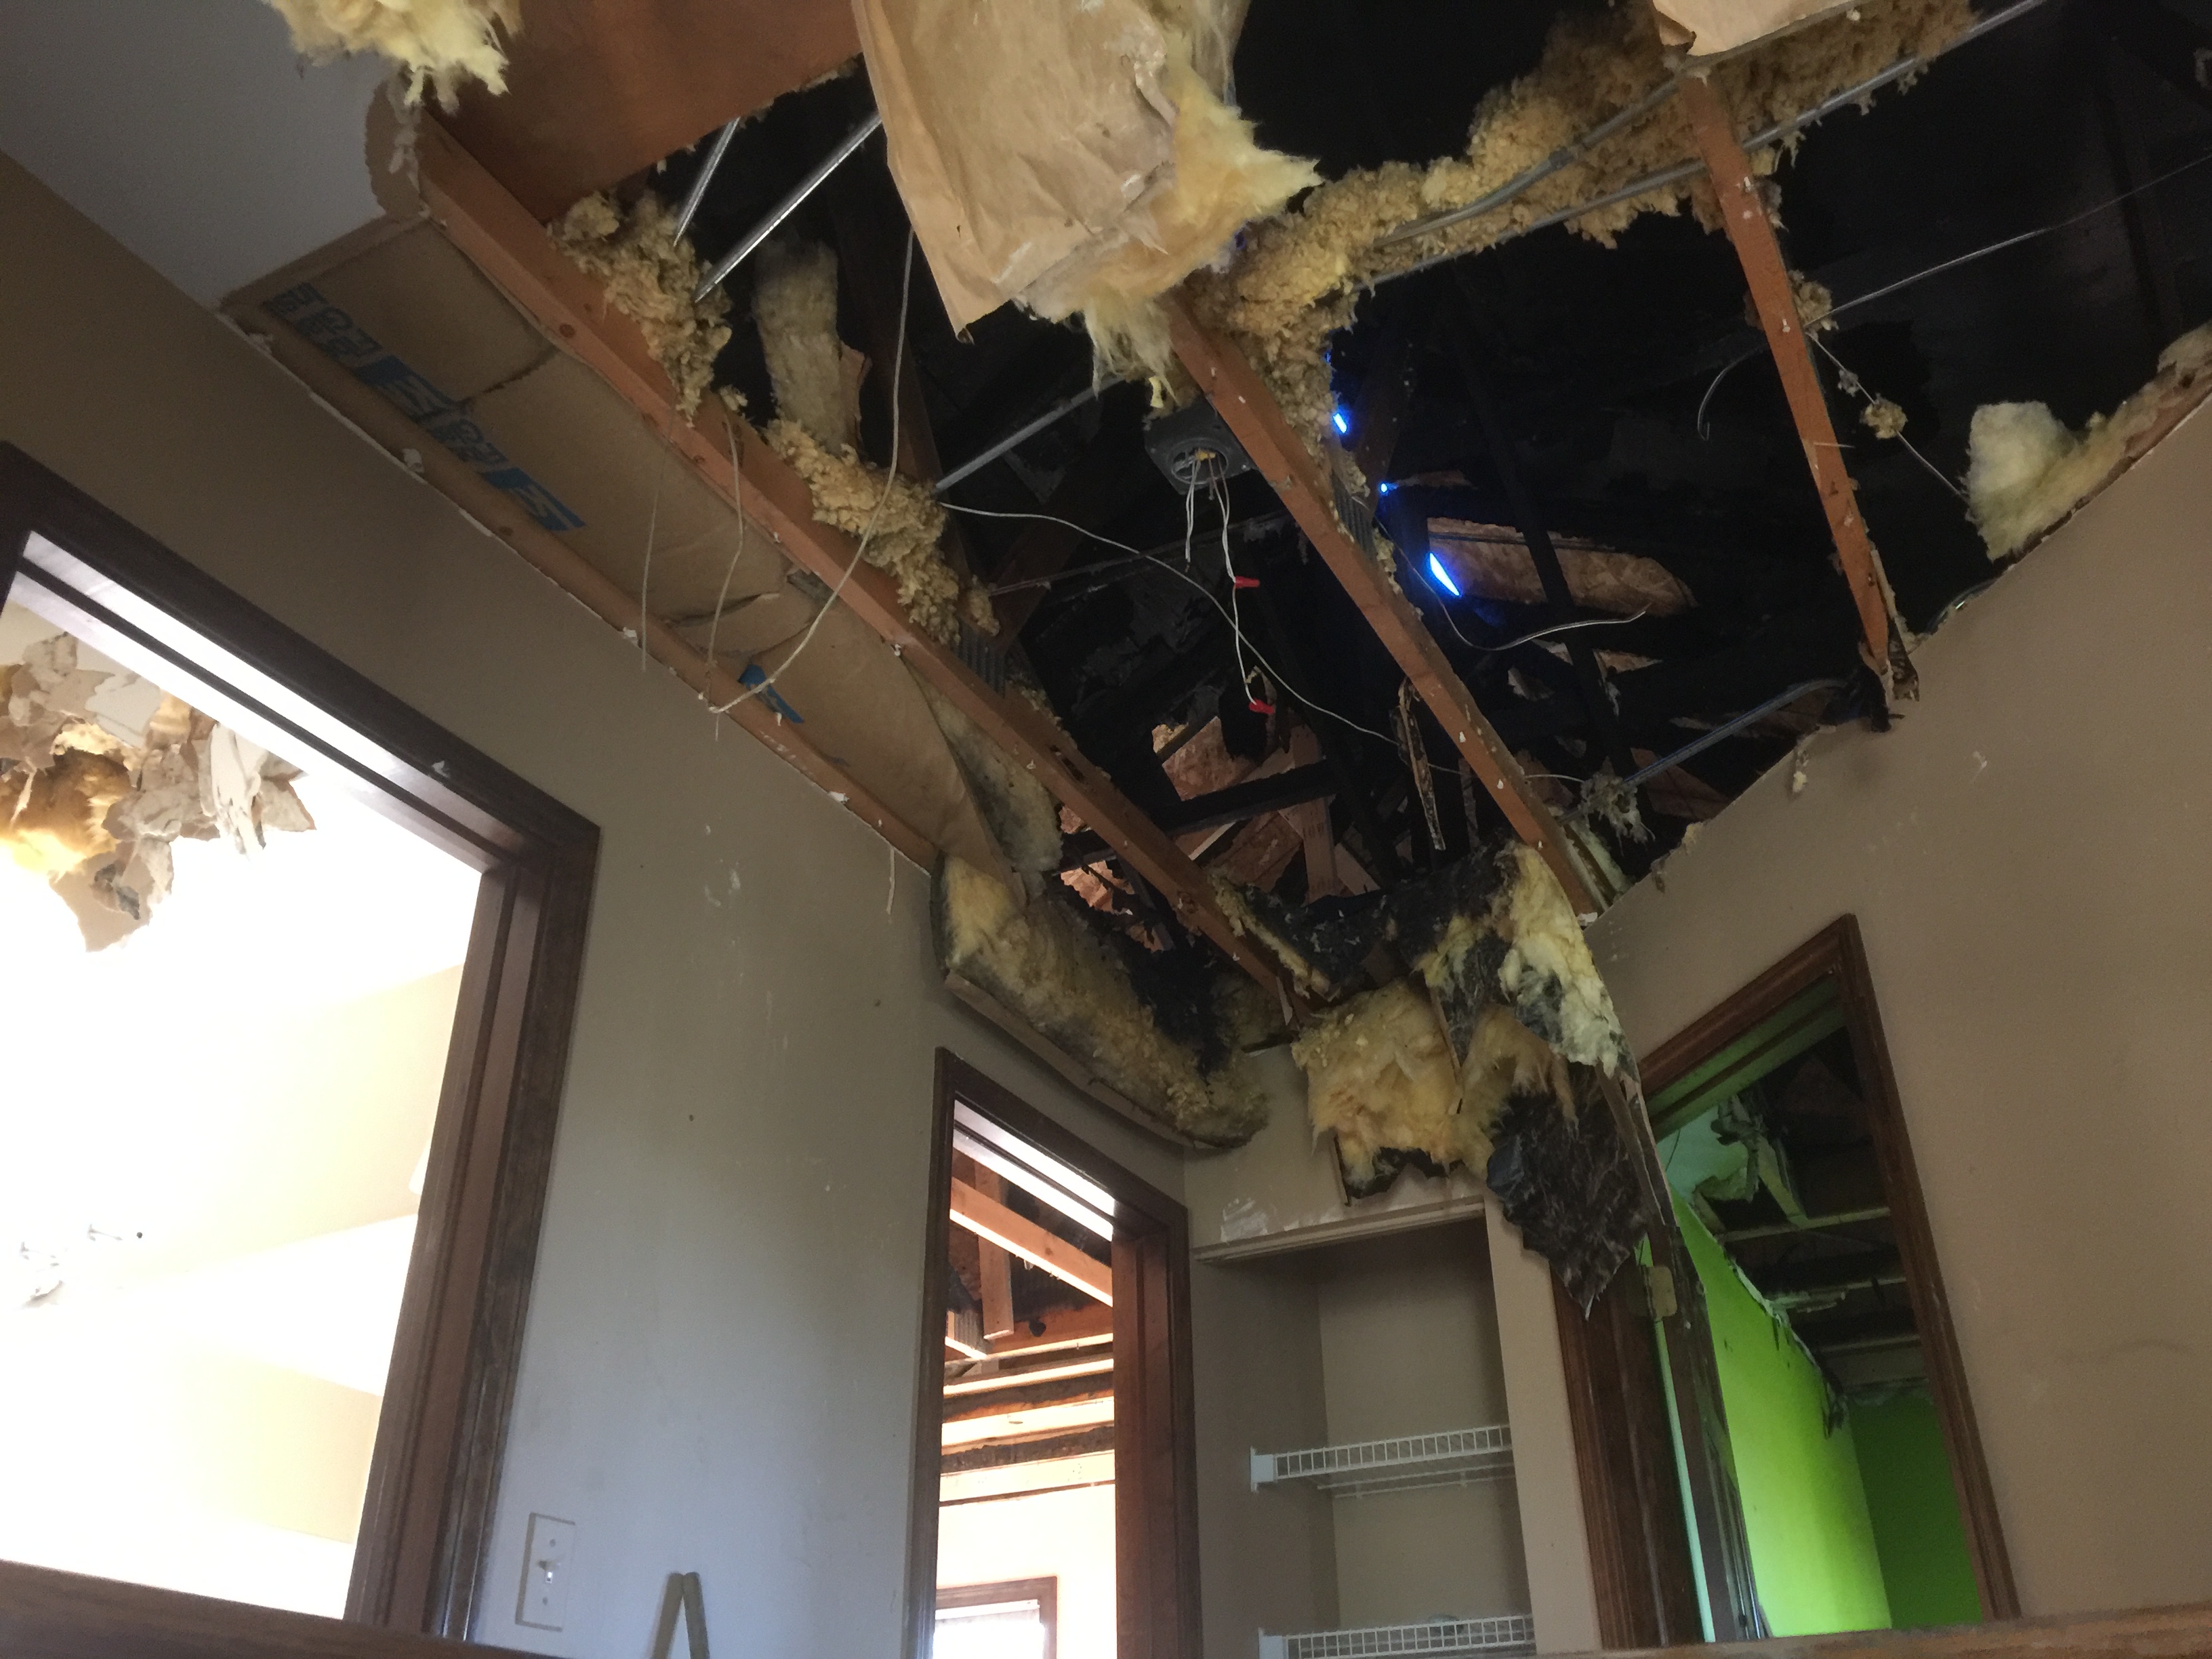 Ceiling damage due to water. #SERVPRO was there to help.